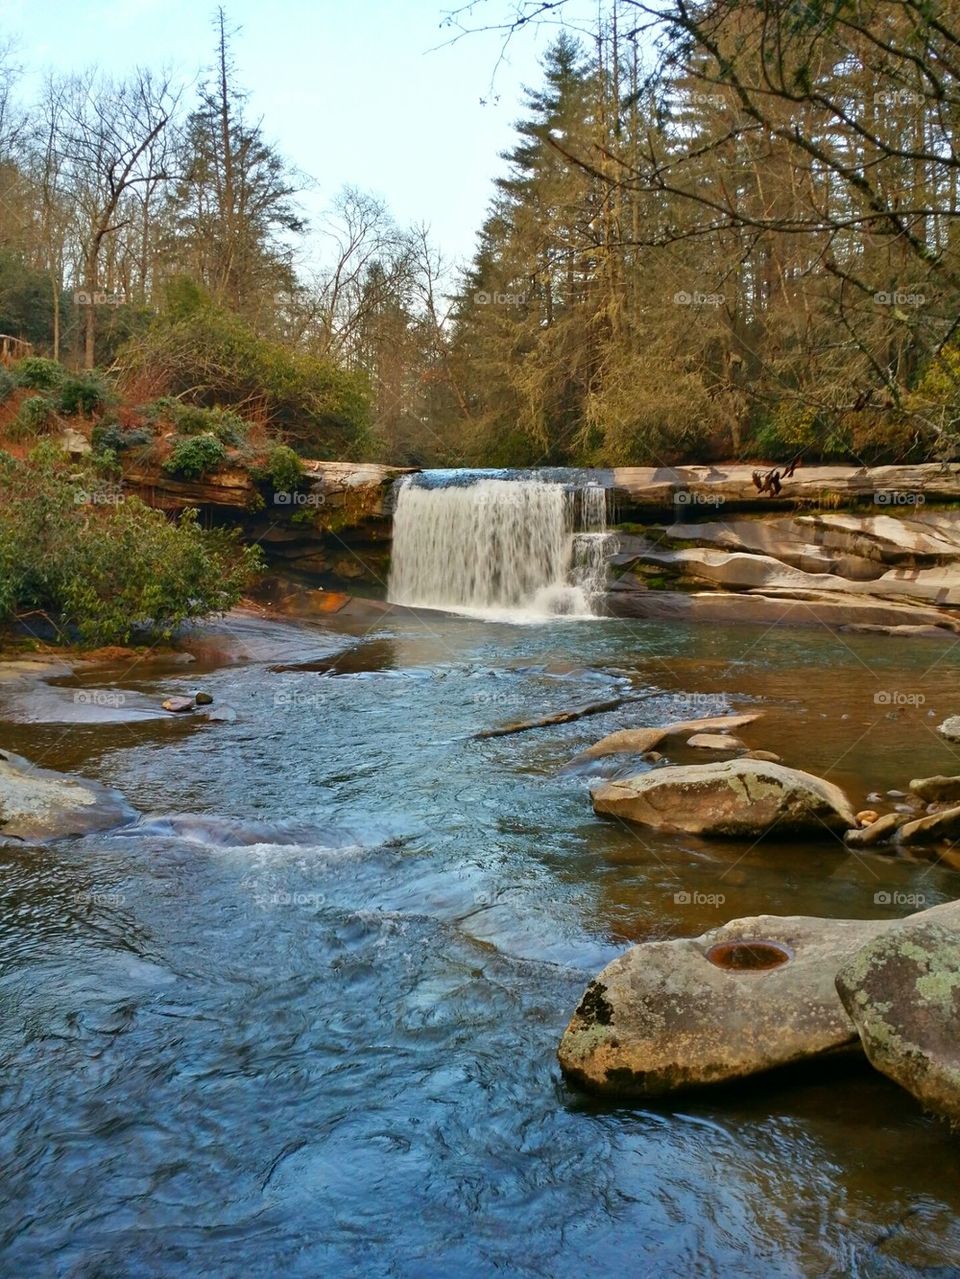 Waterfall on the French Broad River